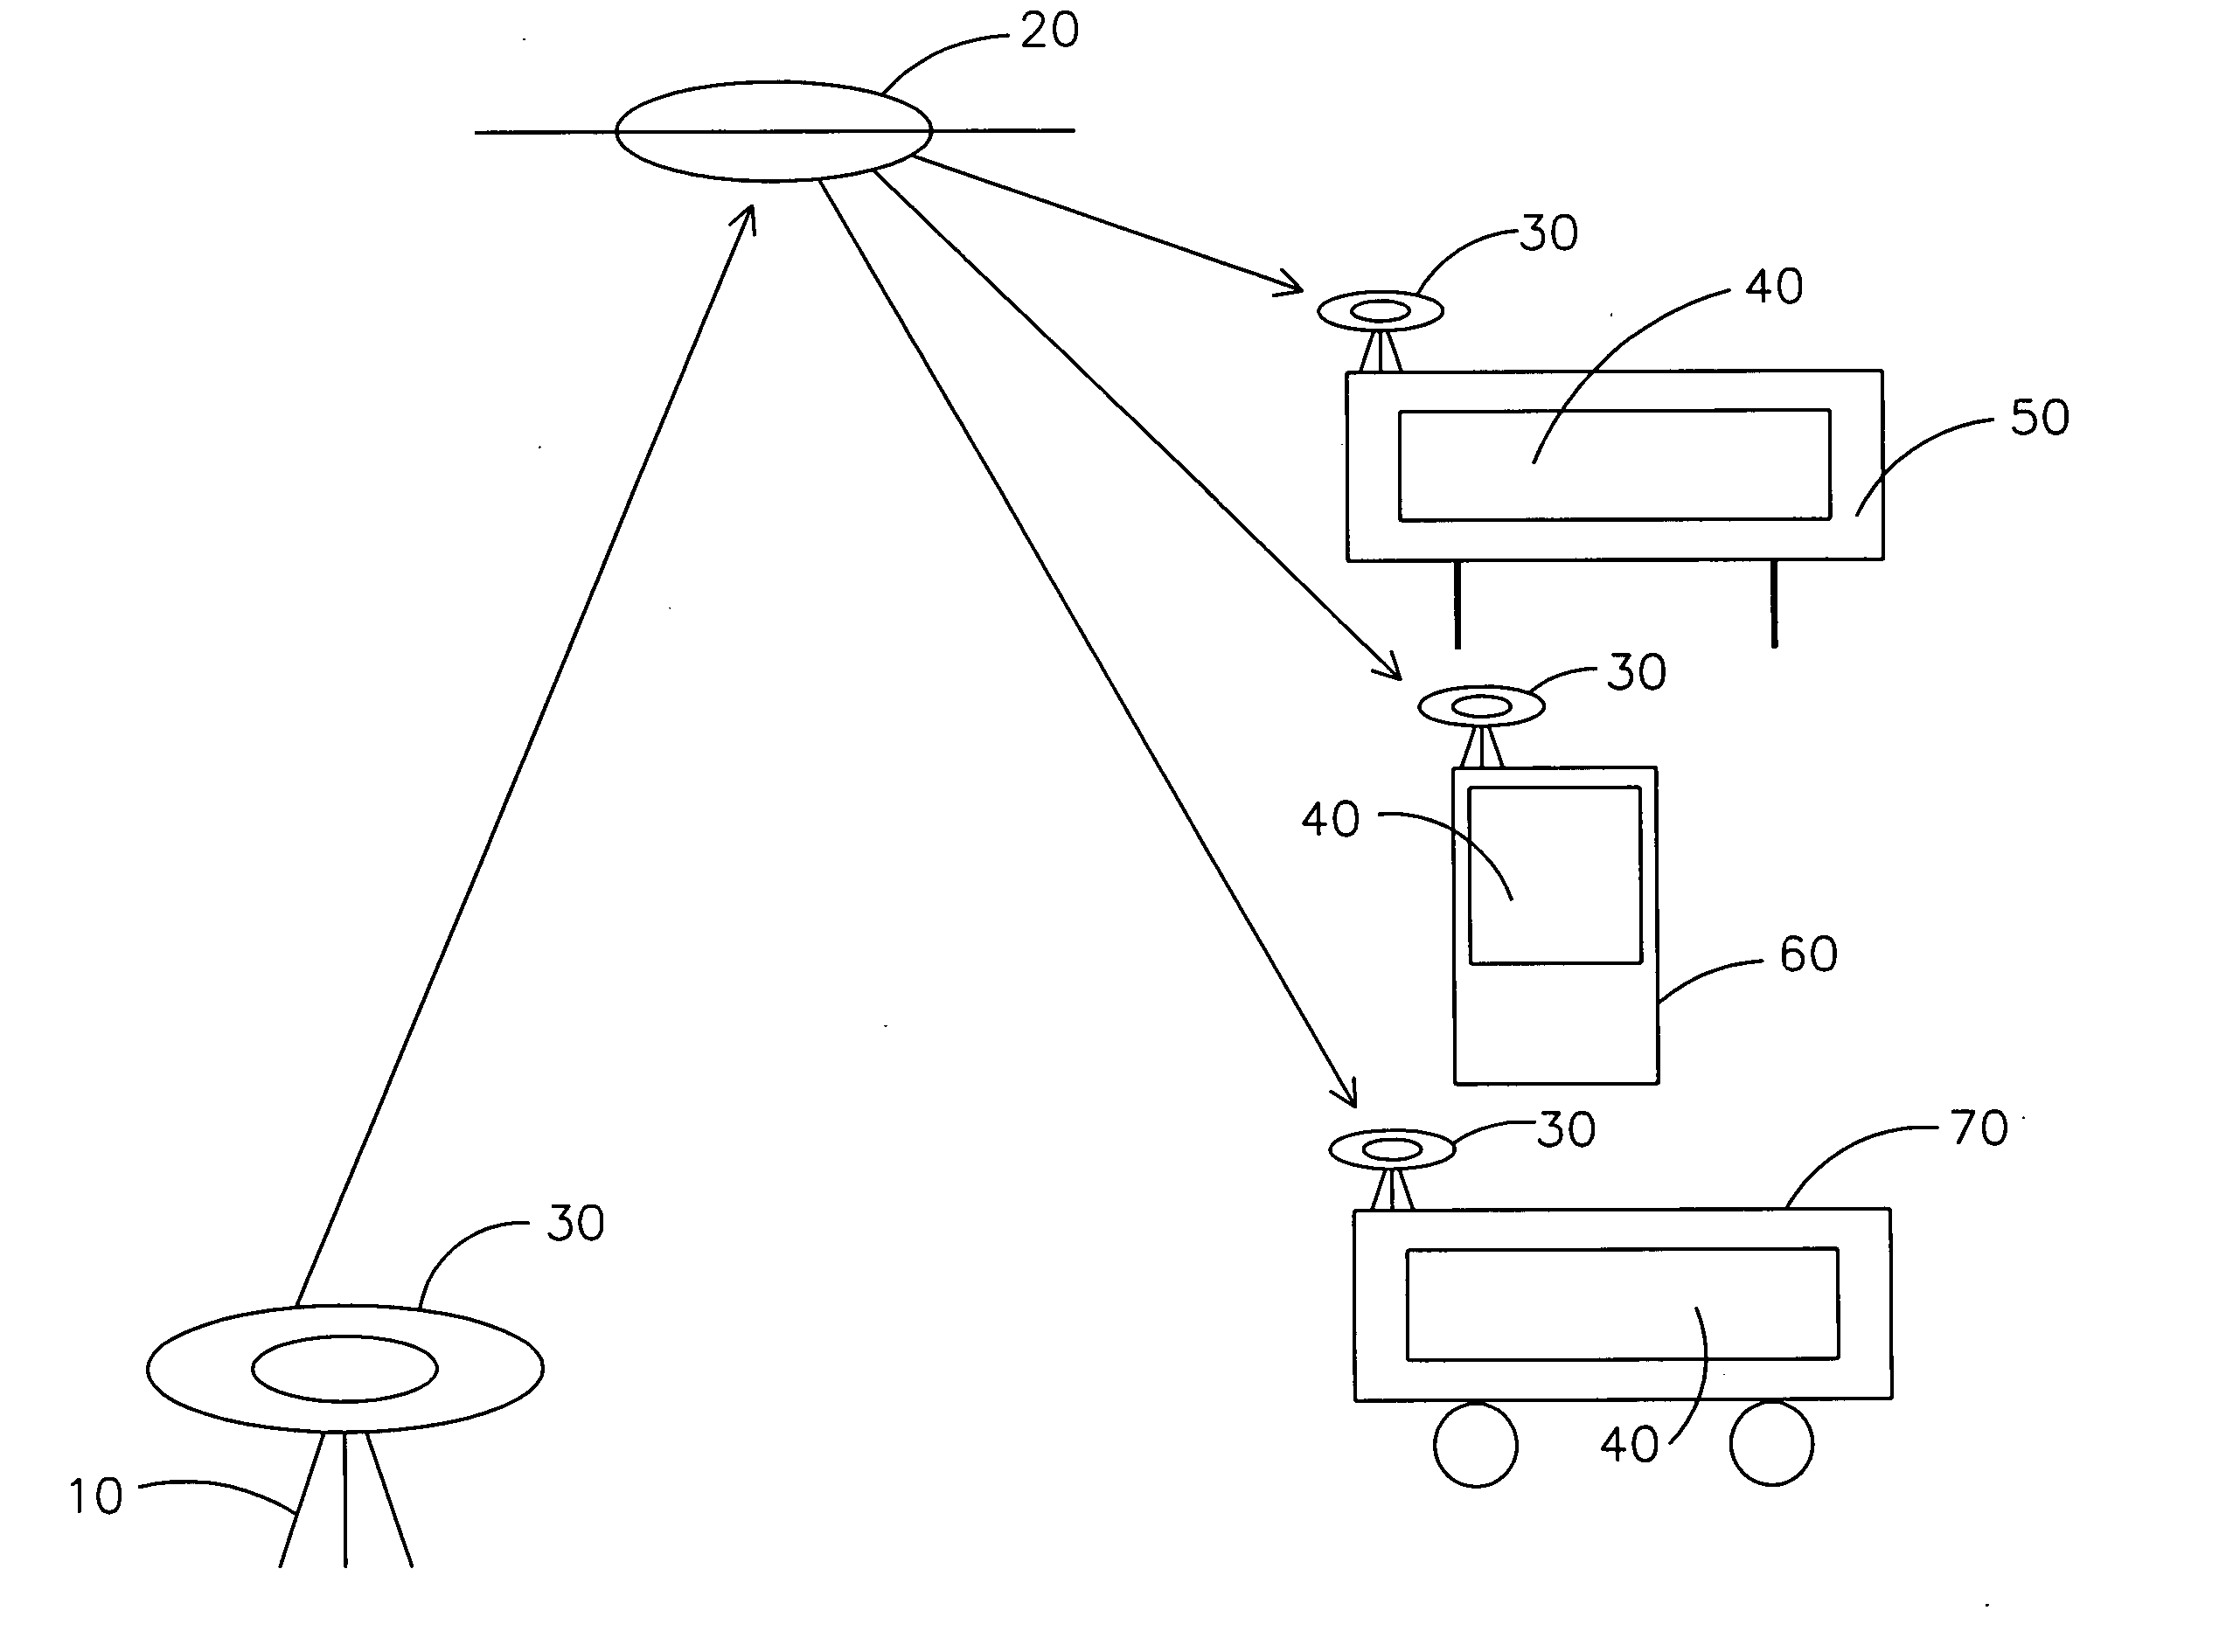 Methods and apparatus for remotely displaying and distributing advertising and emergency information